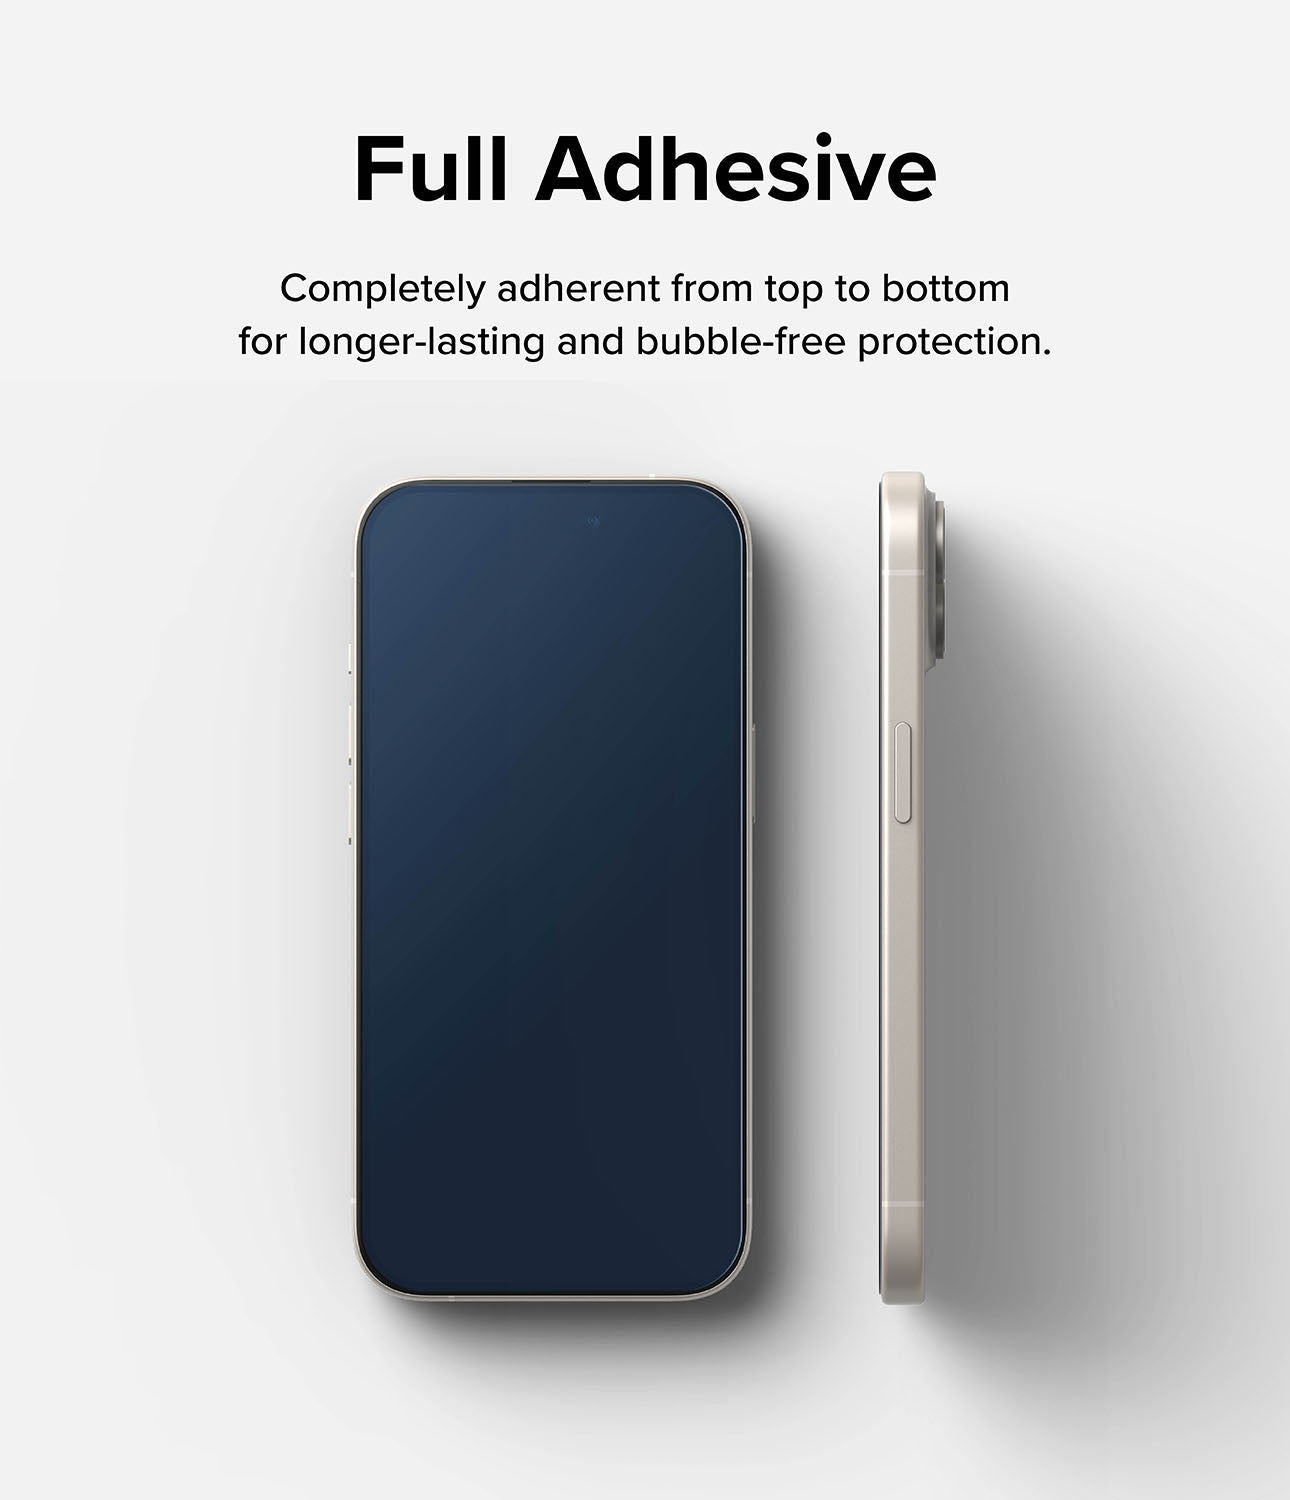 iPhone 15 Plus Screen Protector | Full Cover Glass - Full Adhesive. Completely adherent from top to bottom for longer-lasting and bubble-free protection.